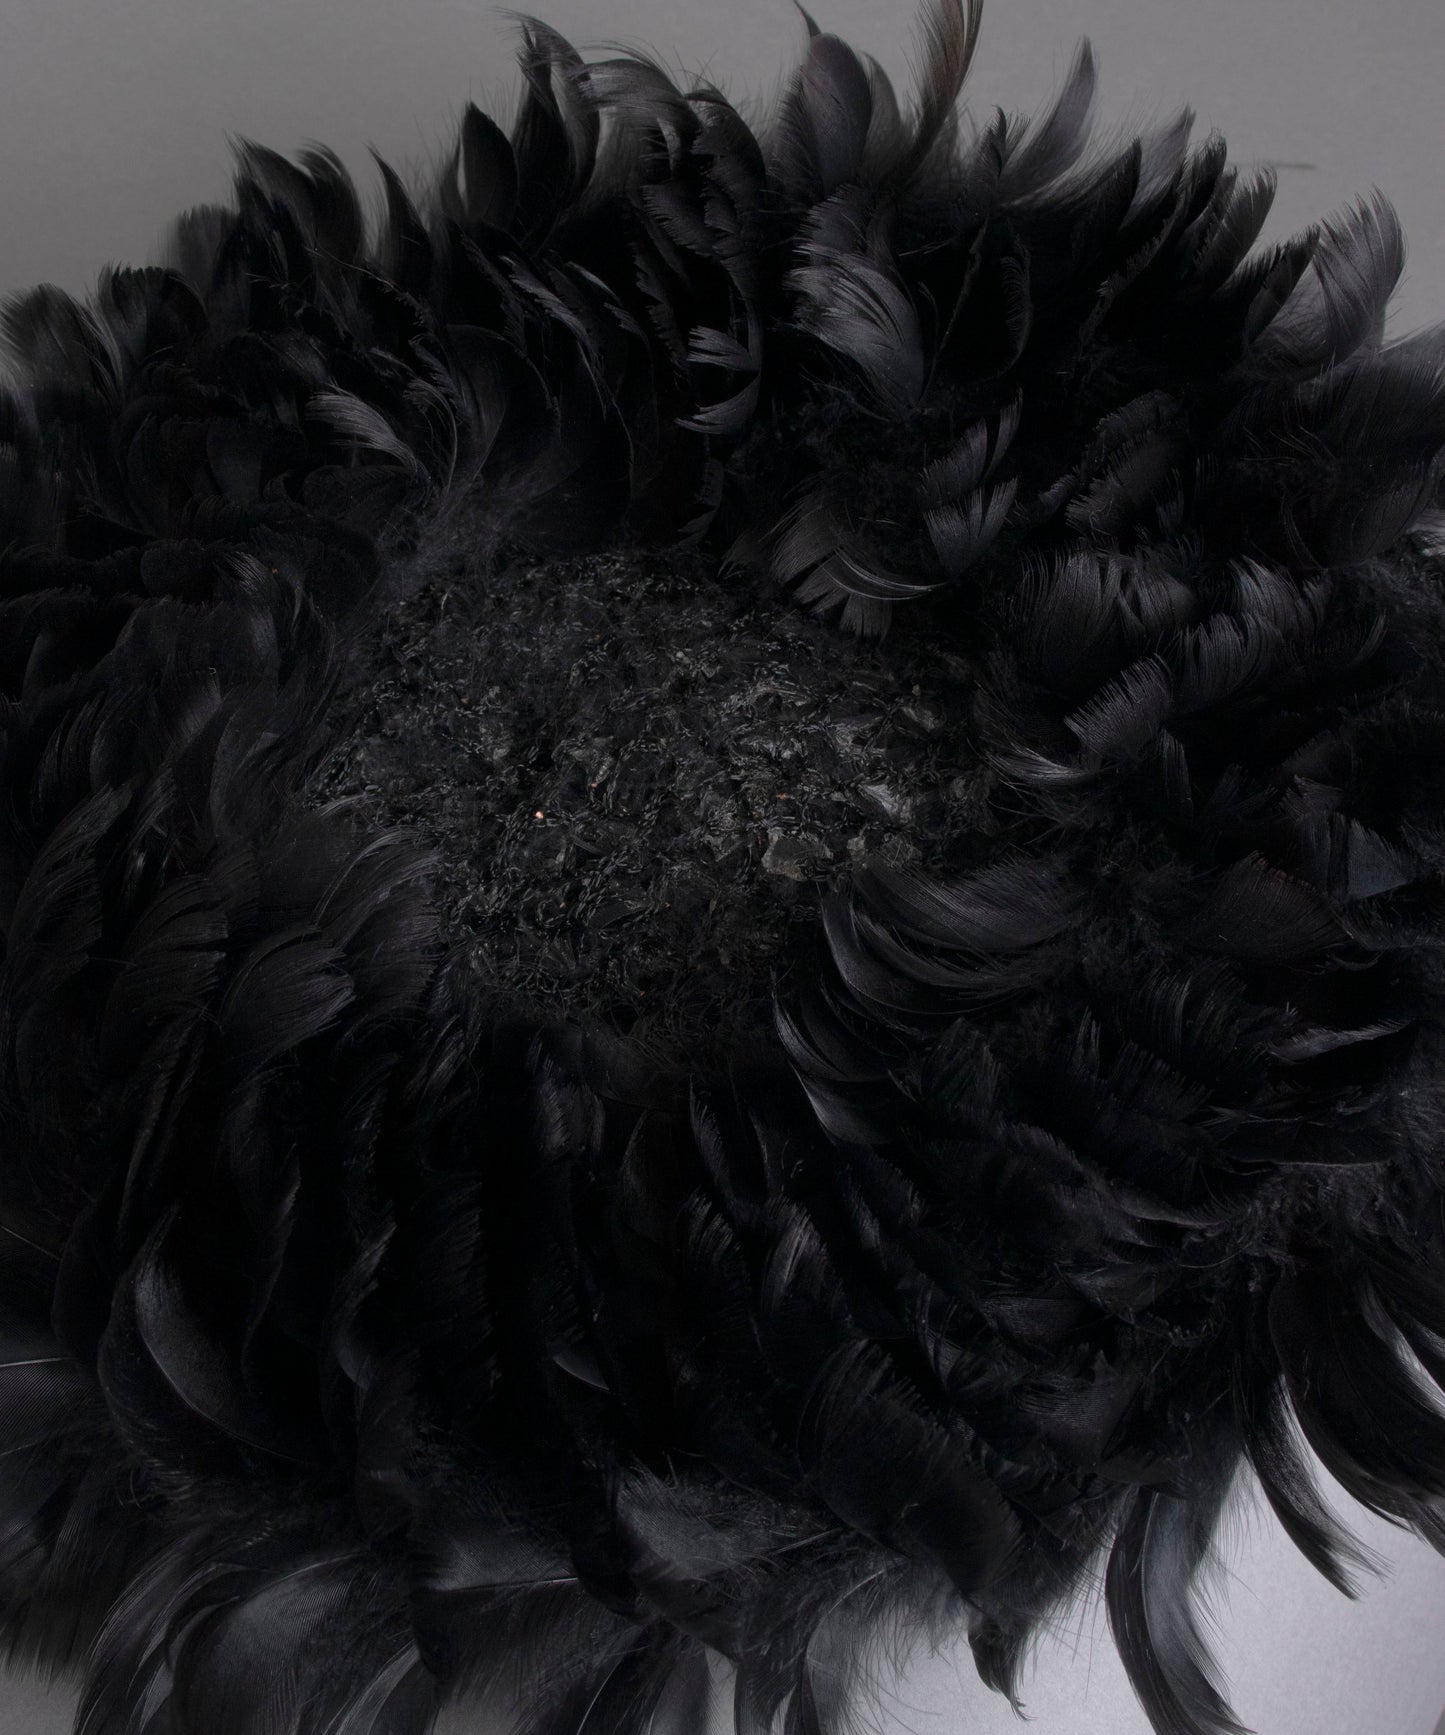 60s Black Feather Hat O/S